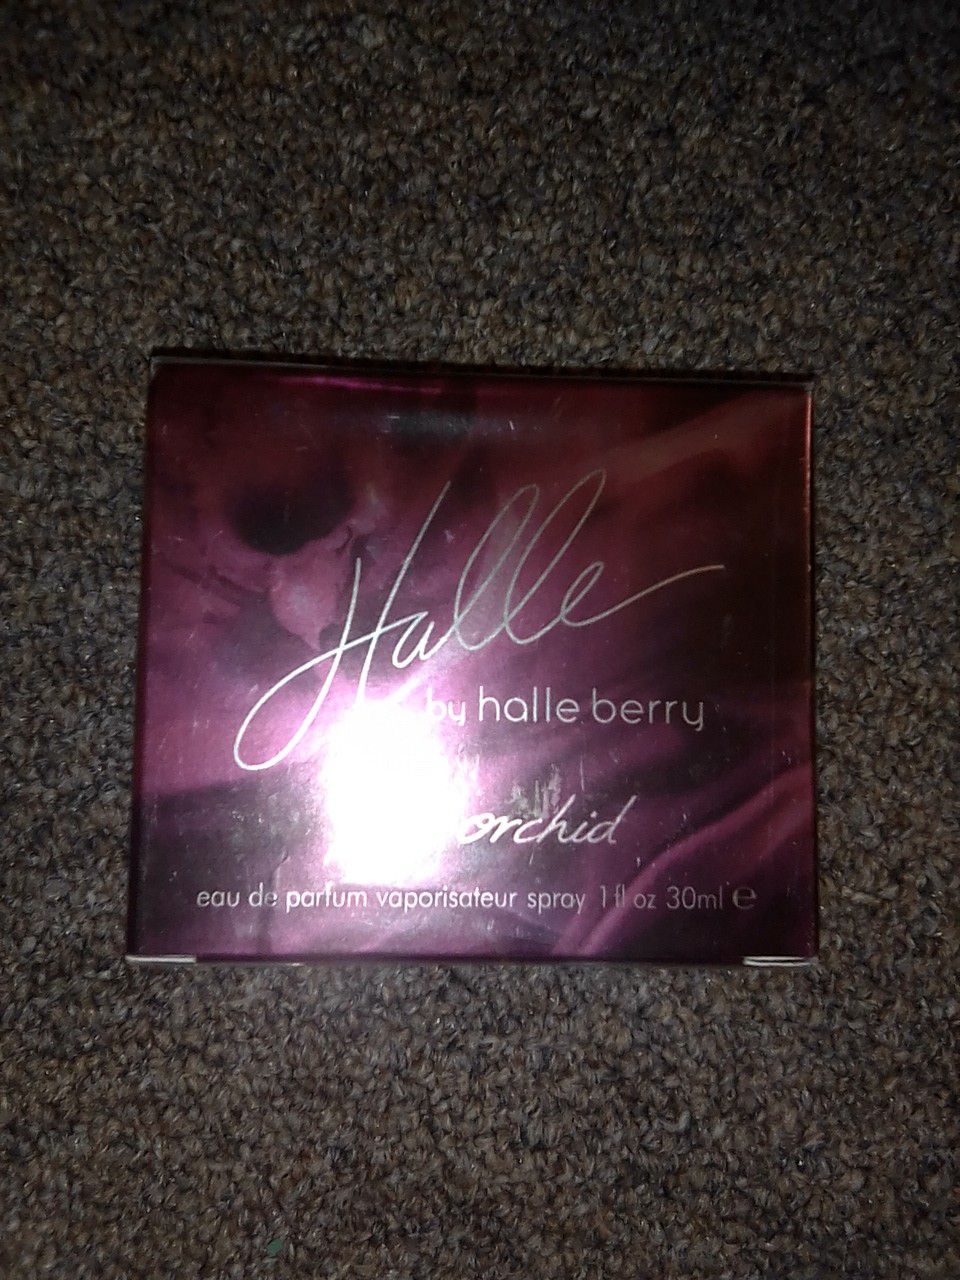 Halle berry perfume pure orchid